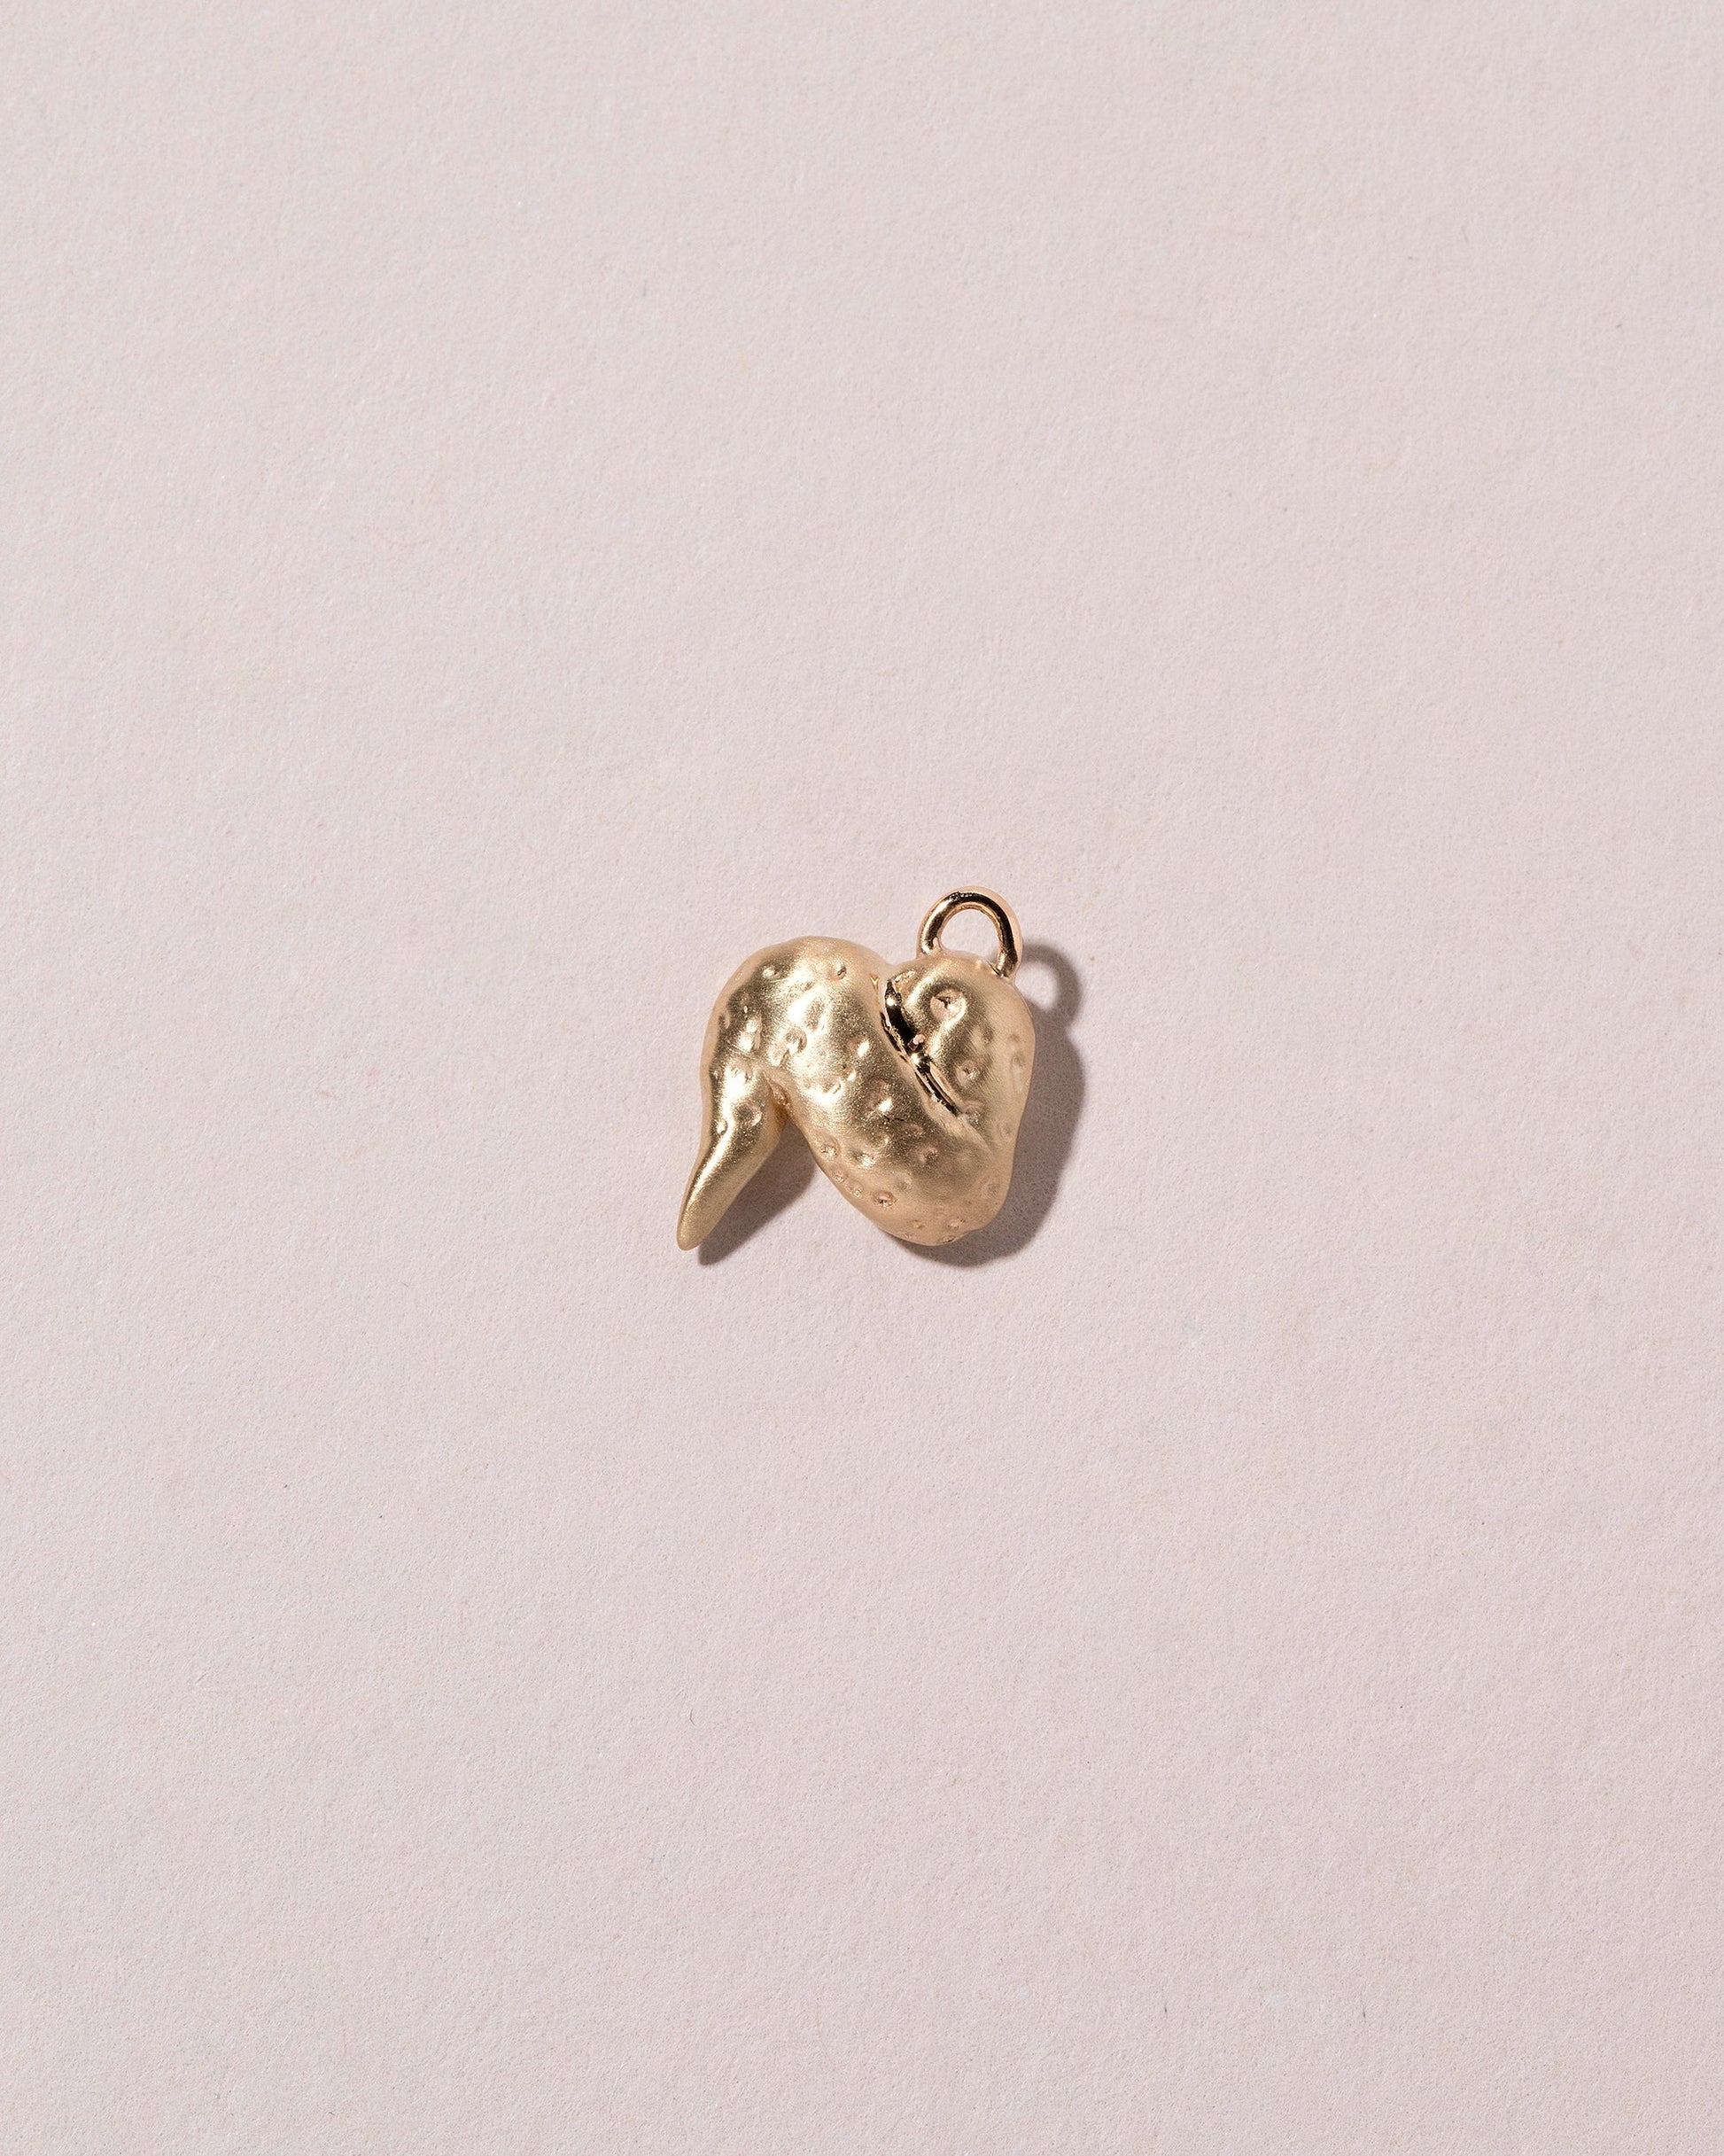  Chicken Wing Charm on light color background.